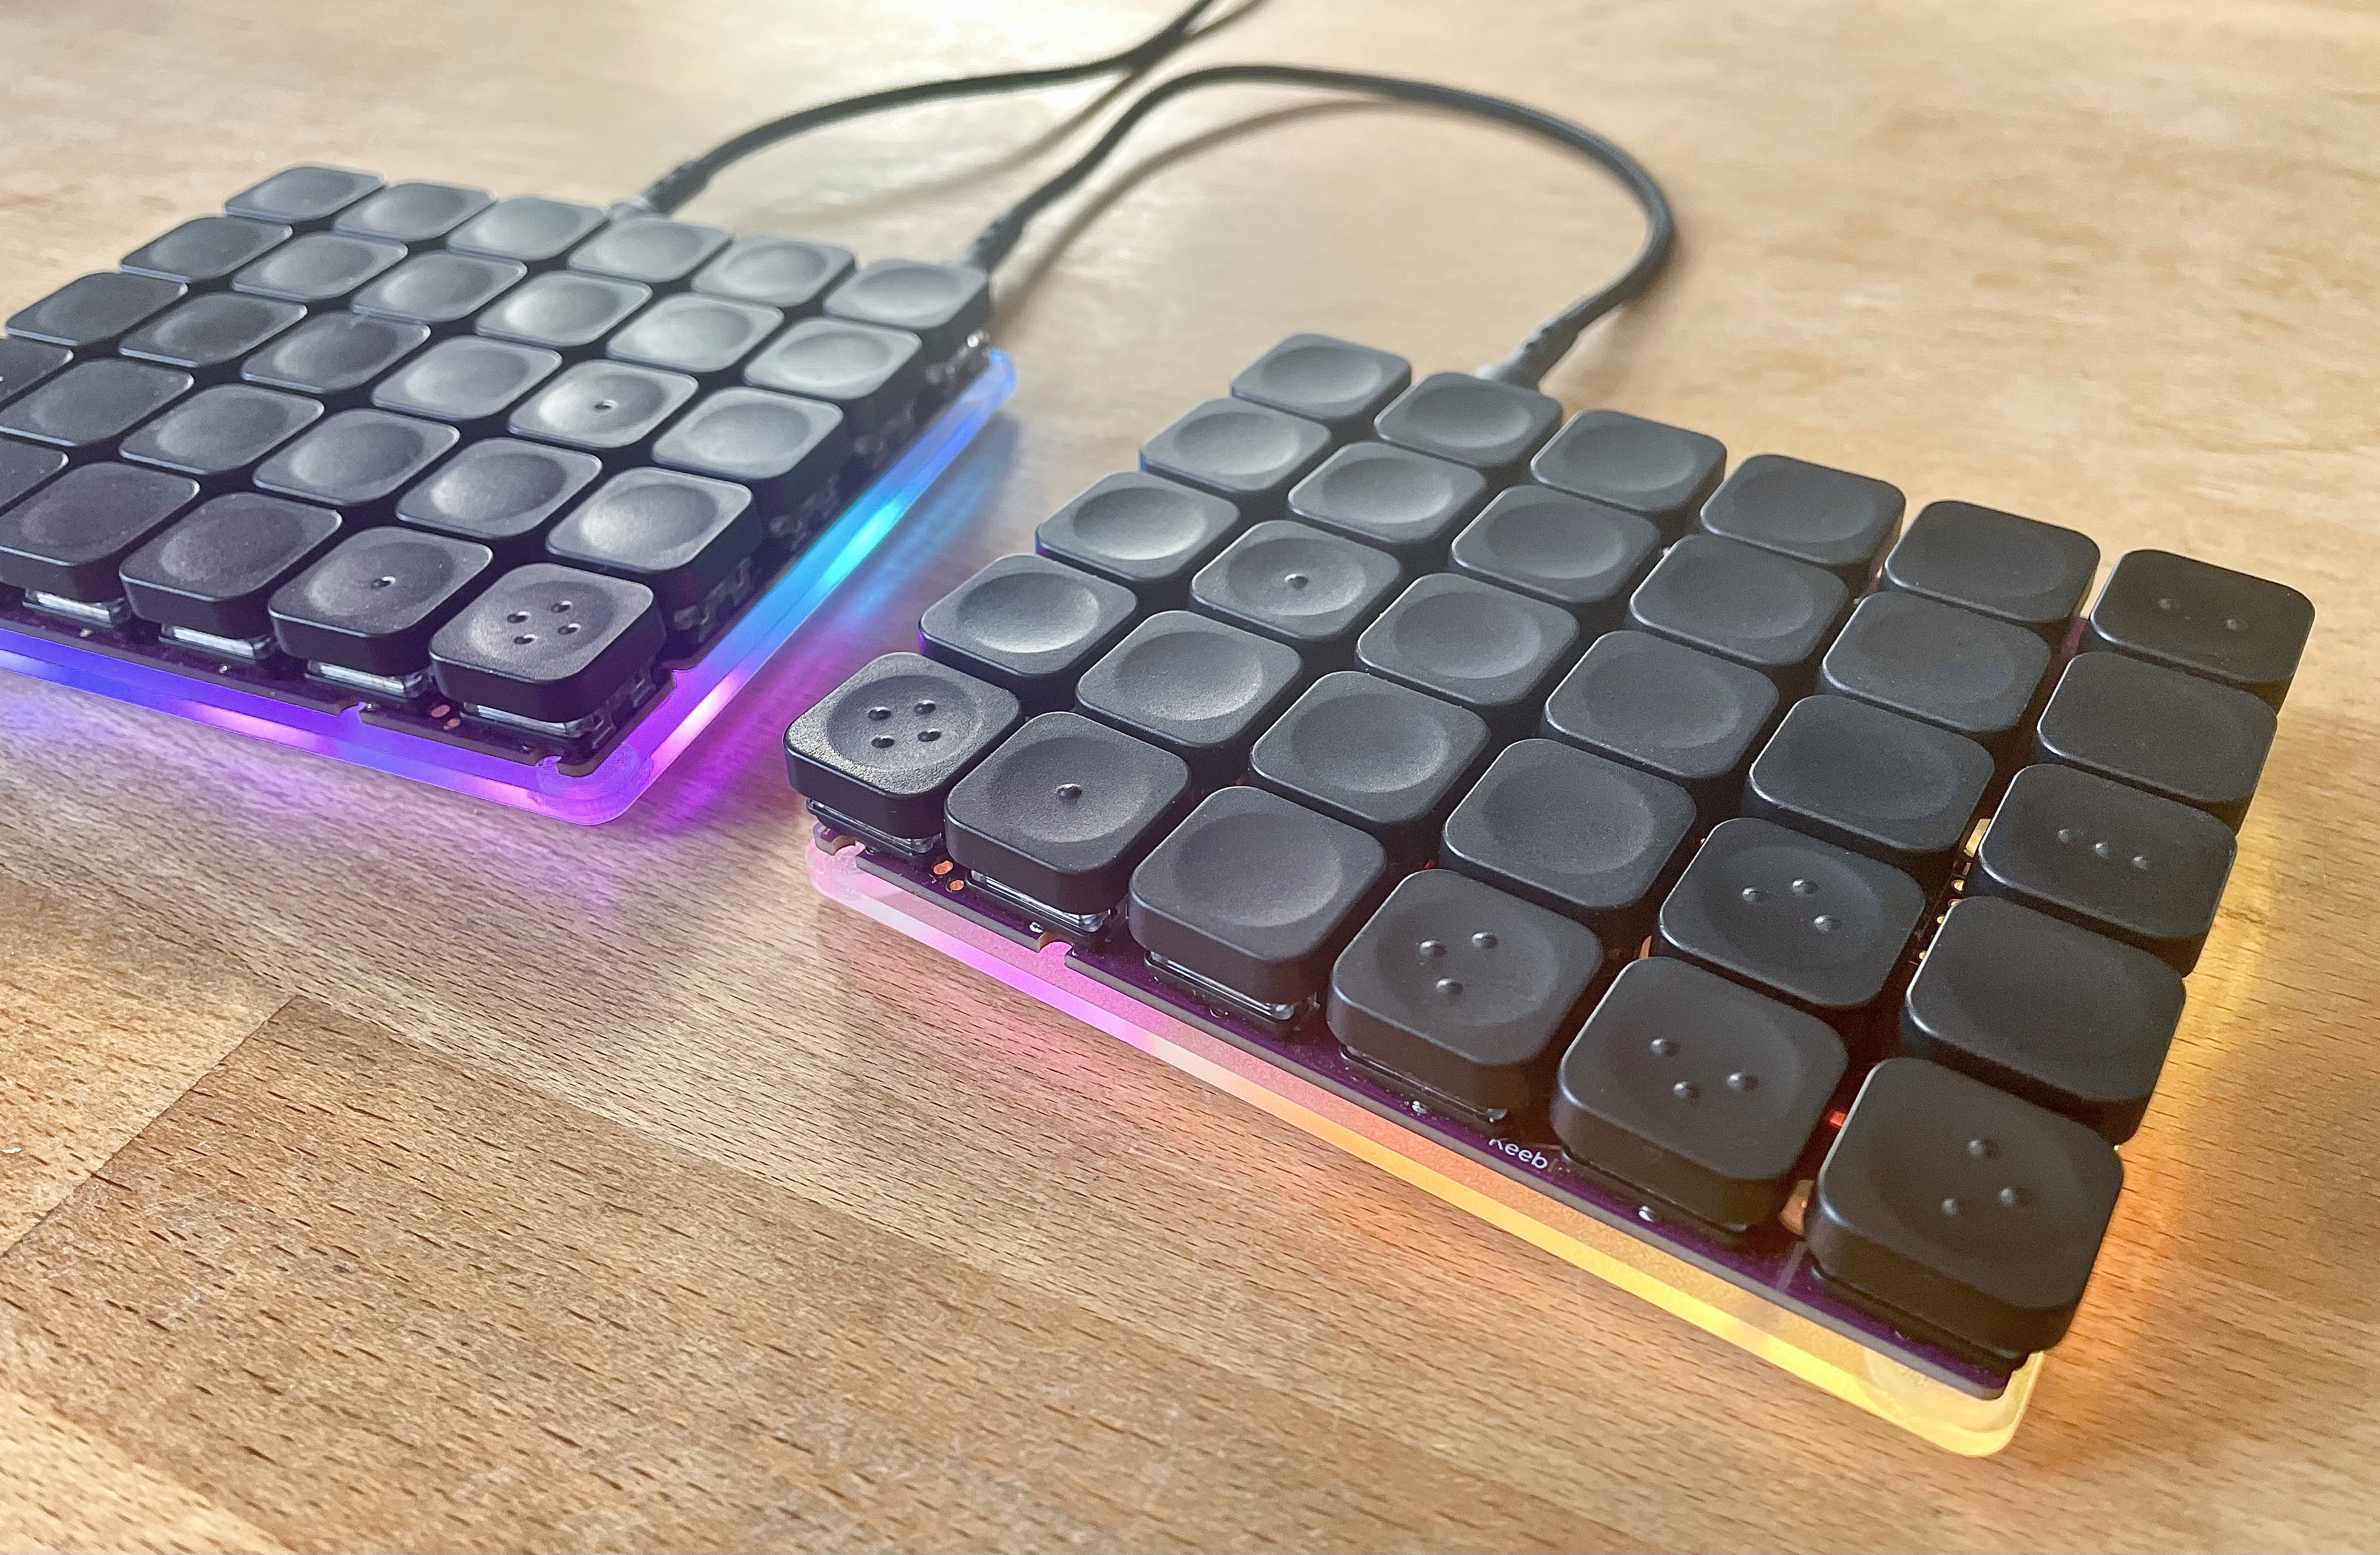 The bottom and side edges align nicely with the keycaps